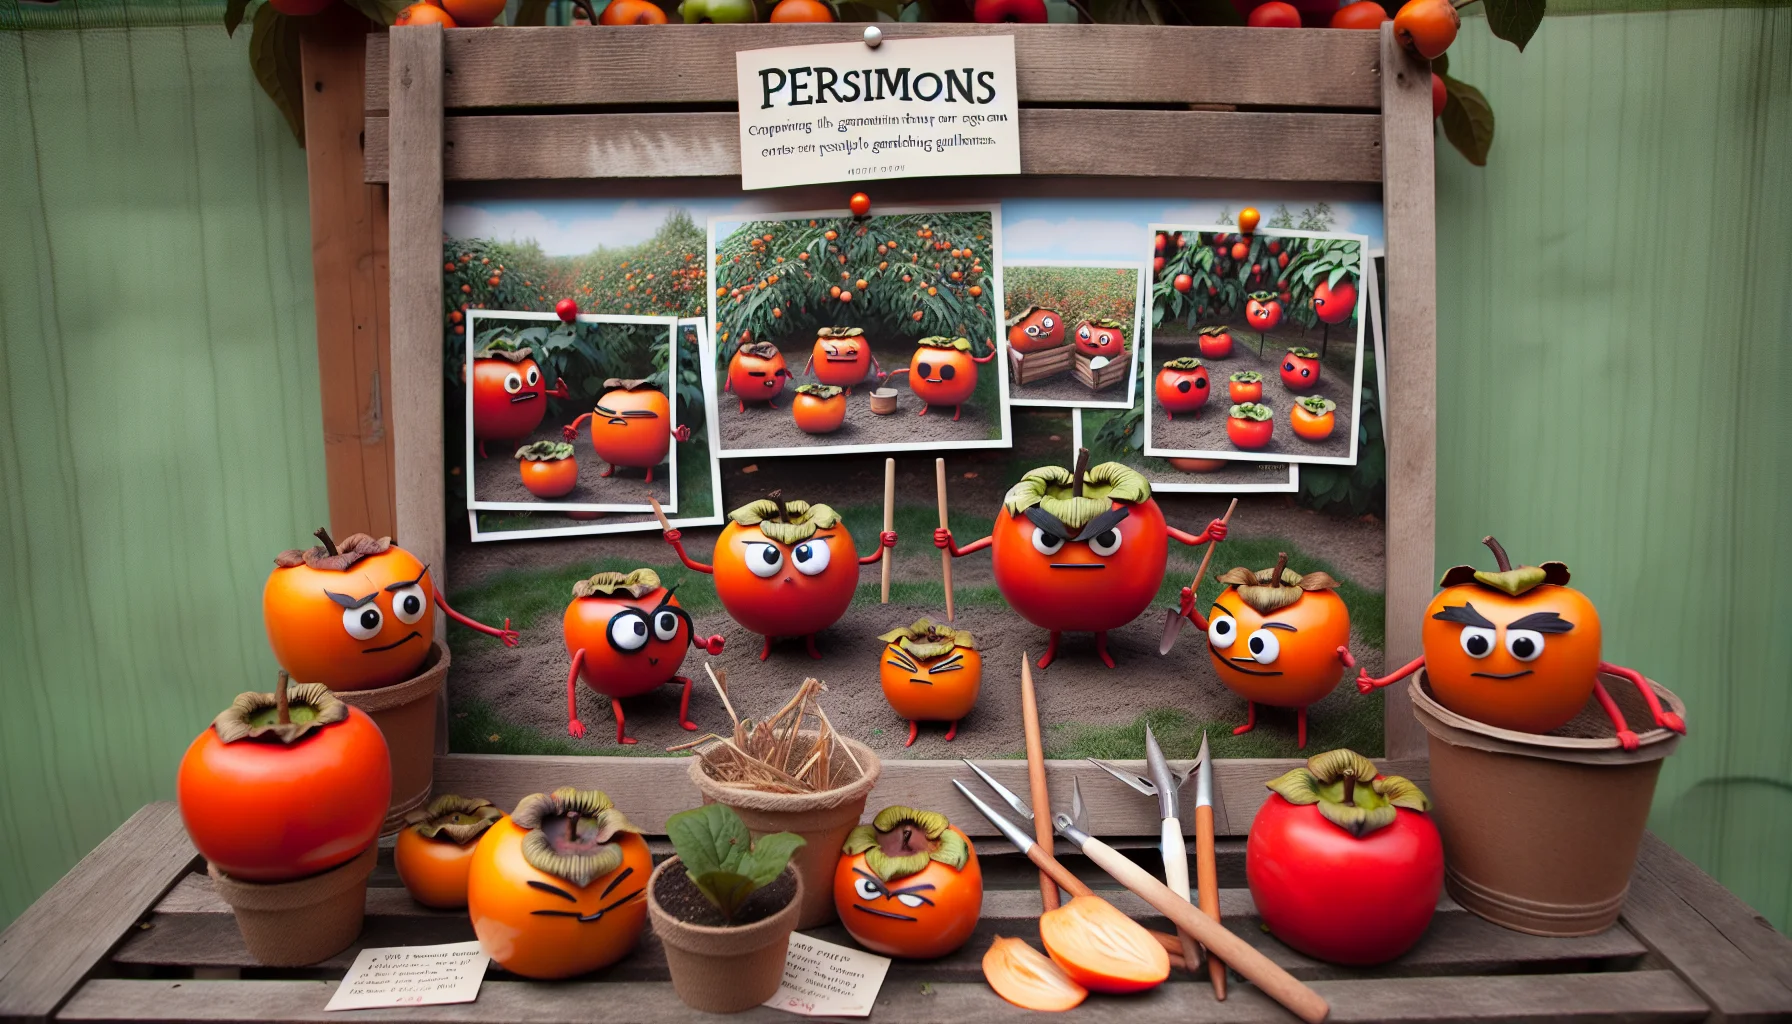 Craft a humorous, photo-realistic scene set in a gardening setting. Feature prominently different types of persimmons, each type taking on a quirky 'personality'. These personified persimmons can be seen encouraging each other to grow, showcasing their unique qualities, or even slightly exaggerating typical gardening dilemmas. Complement this lively display with rich, natural colors that are inviting and pleasing to the eye, to encourage viewers to take part in gardening and experience the fun and satisfaction it provides.